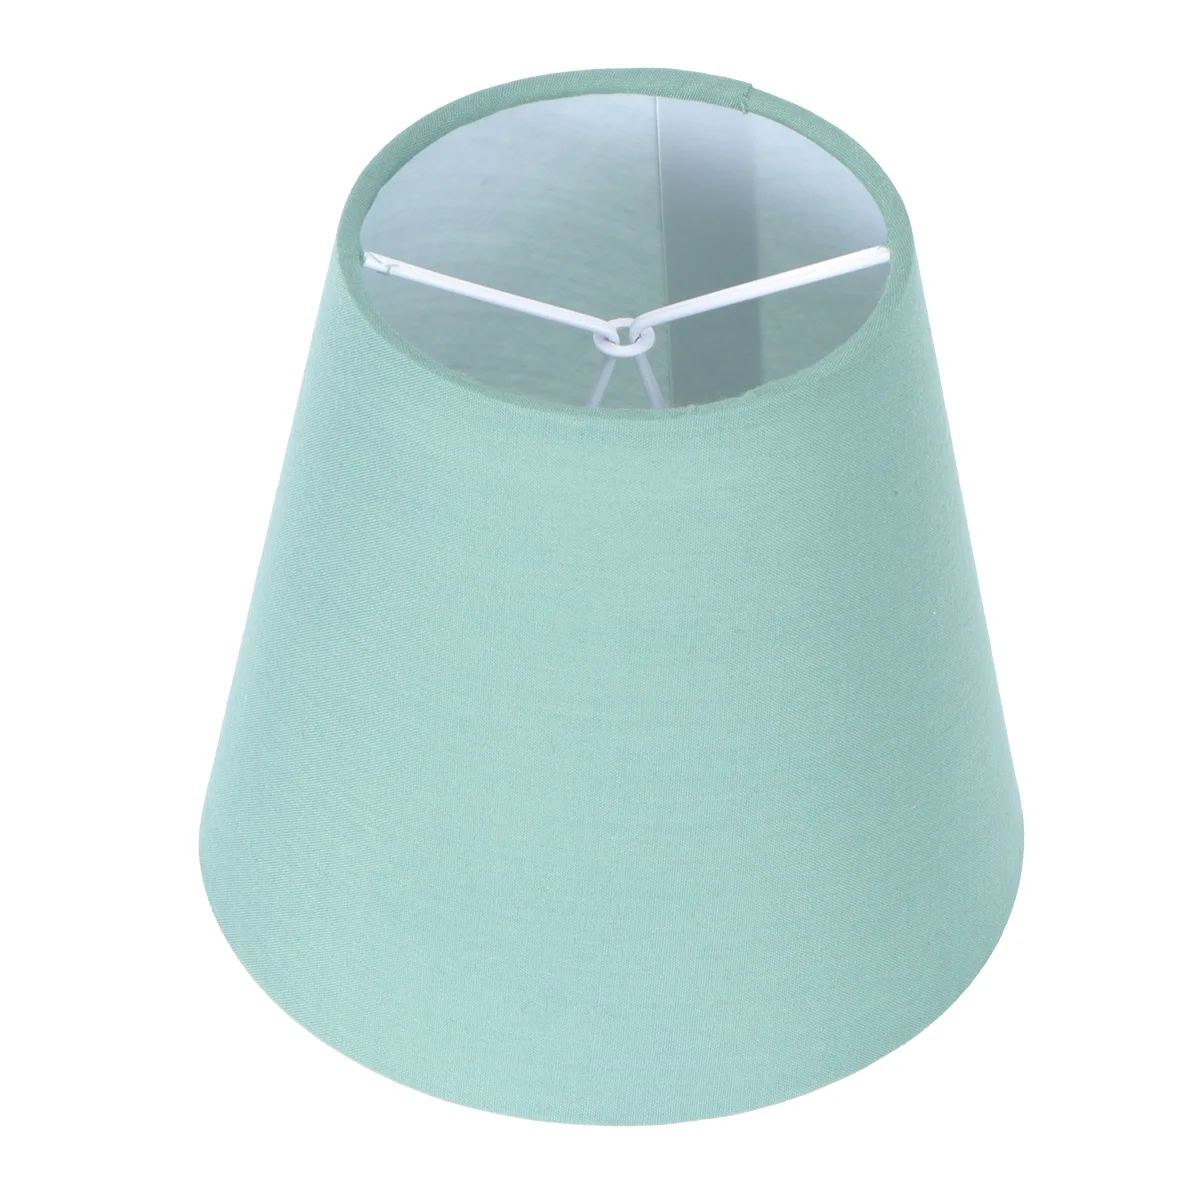 

Shade Lamp Light Lampshade Cover Cloth Table Shades Clip Drum Decor Ceiling Fabric Bulb Linen Chandelier Beside Accessories